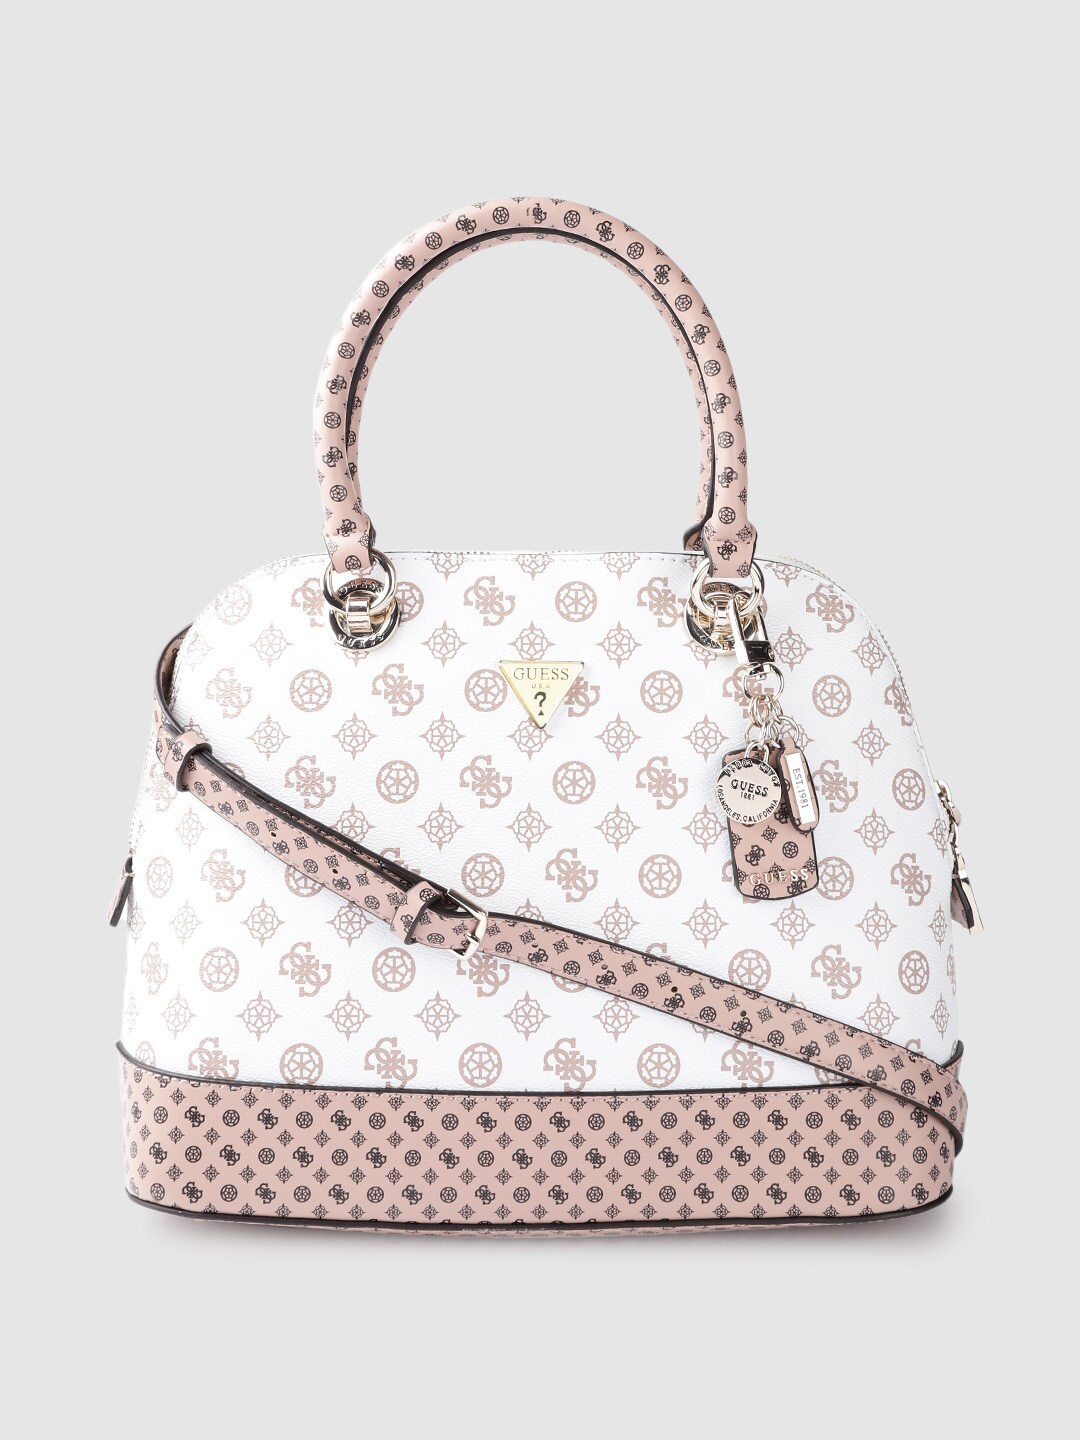 GUESS Women White & Peach-Coloured Brand Logo Print Structured Handheld Bag Price in India